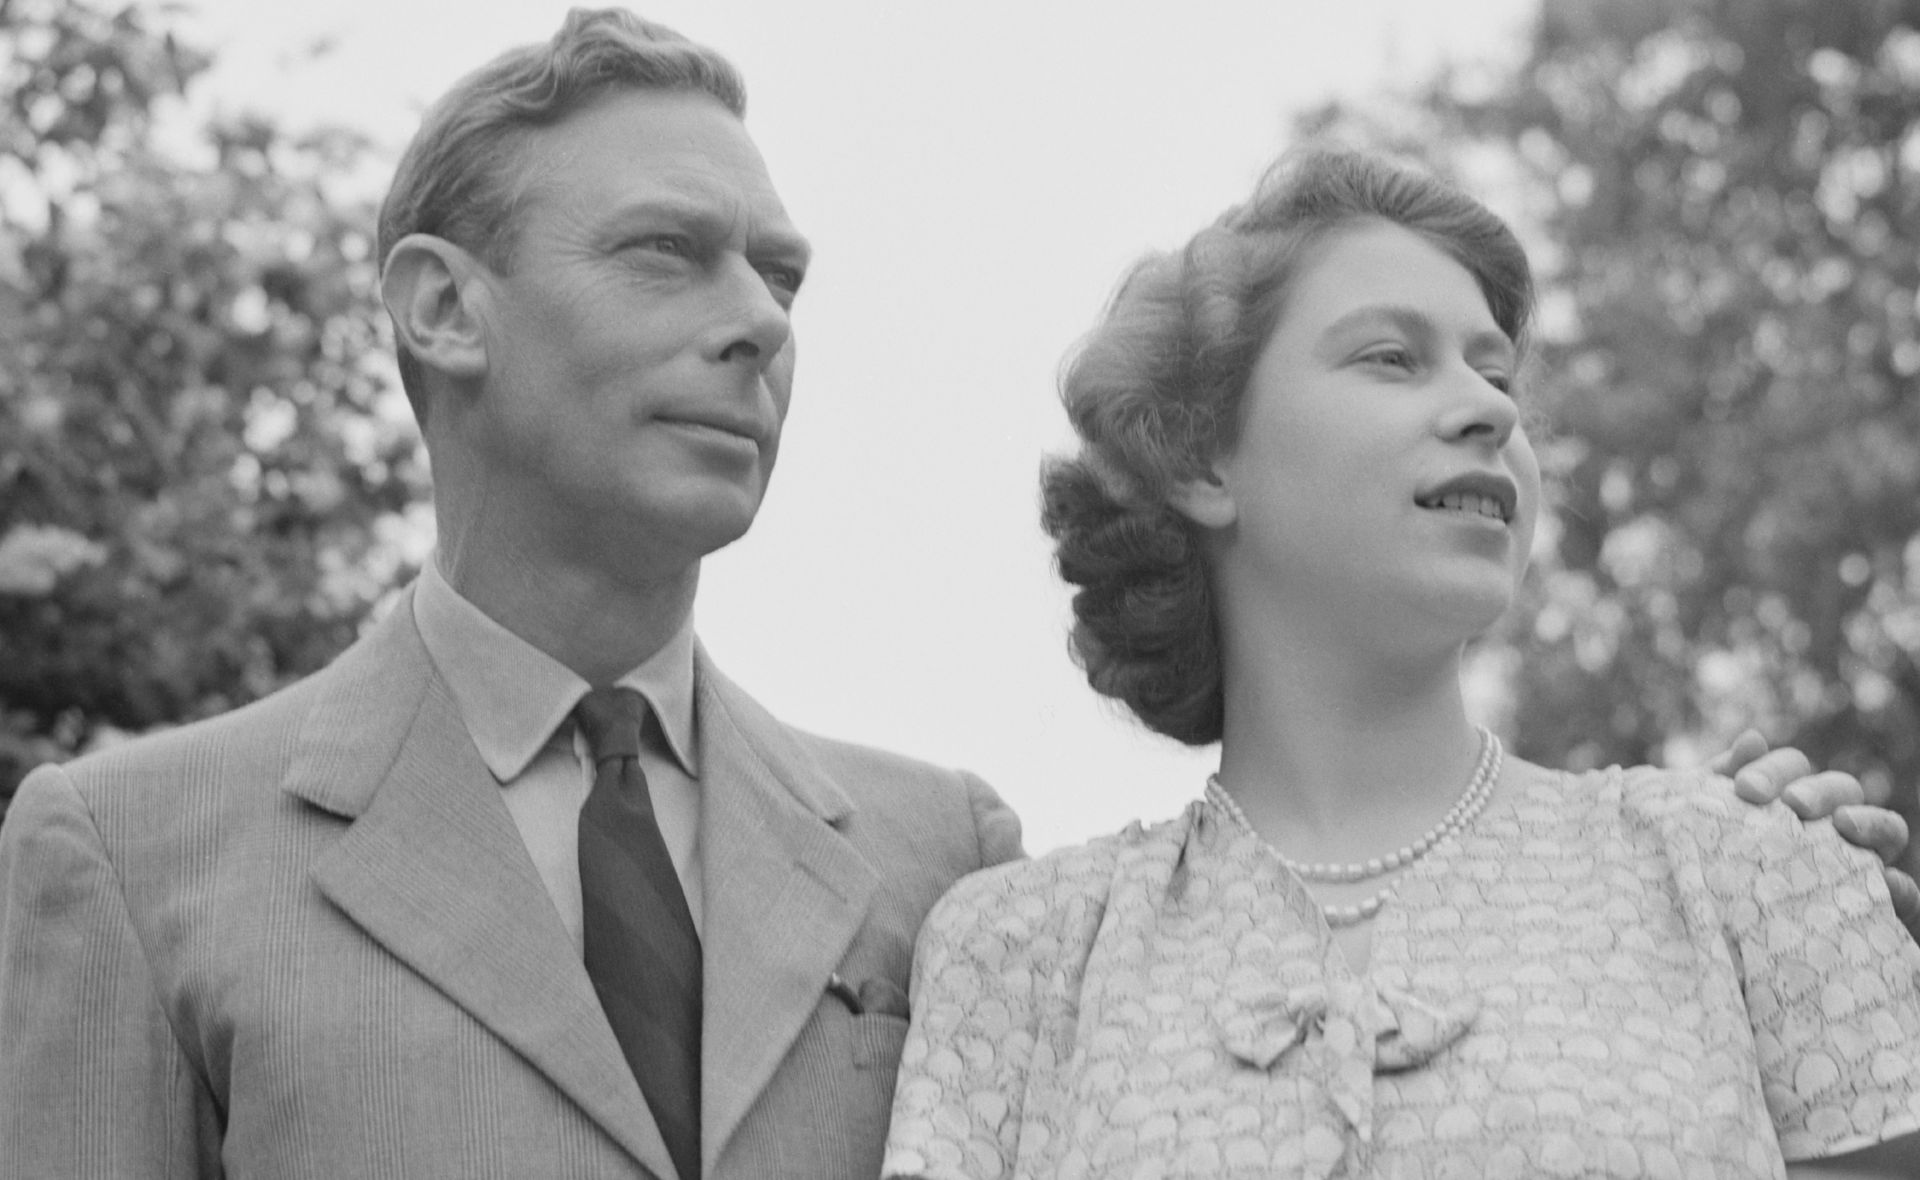 The Queen shares a touching throwback with her late dad King George VI for Father’s Day in the United Kingdom